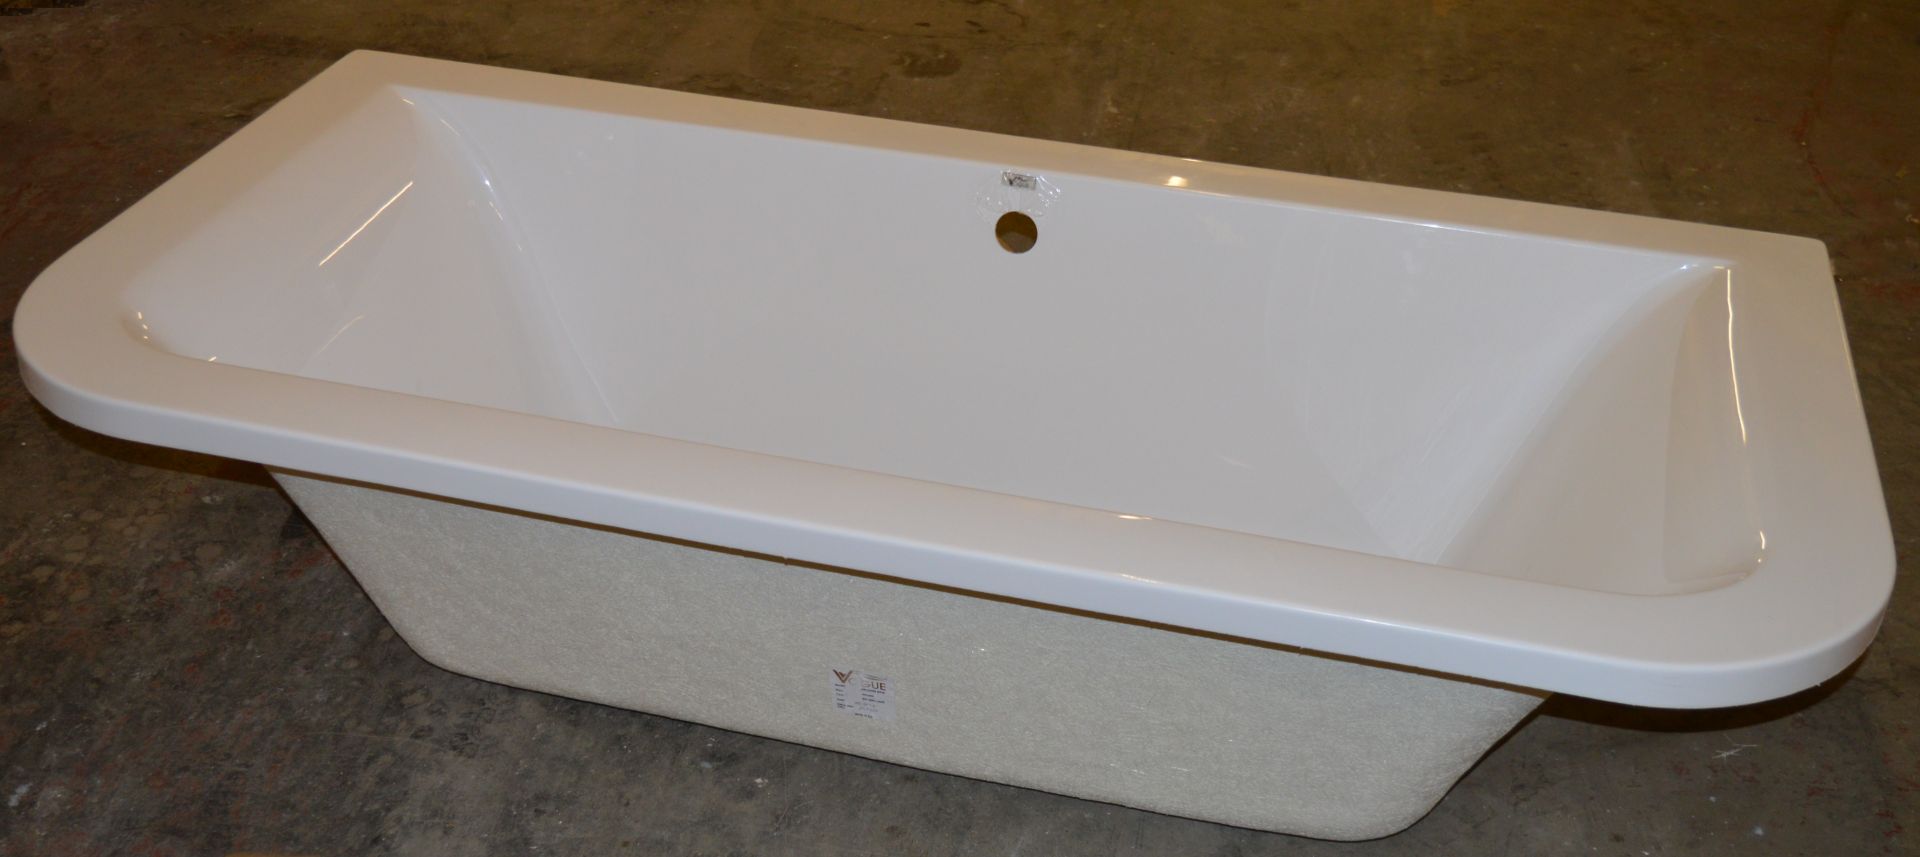 1 x Vogue Bathrooms Options Back to Wall D Shape Double Ended Acrylic Bath With Side Panel - Stylish - Image 4 of 9